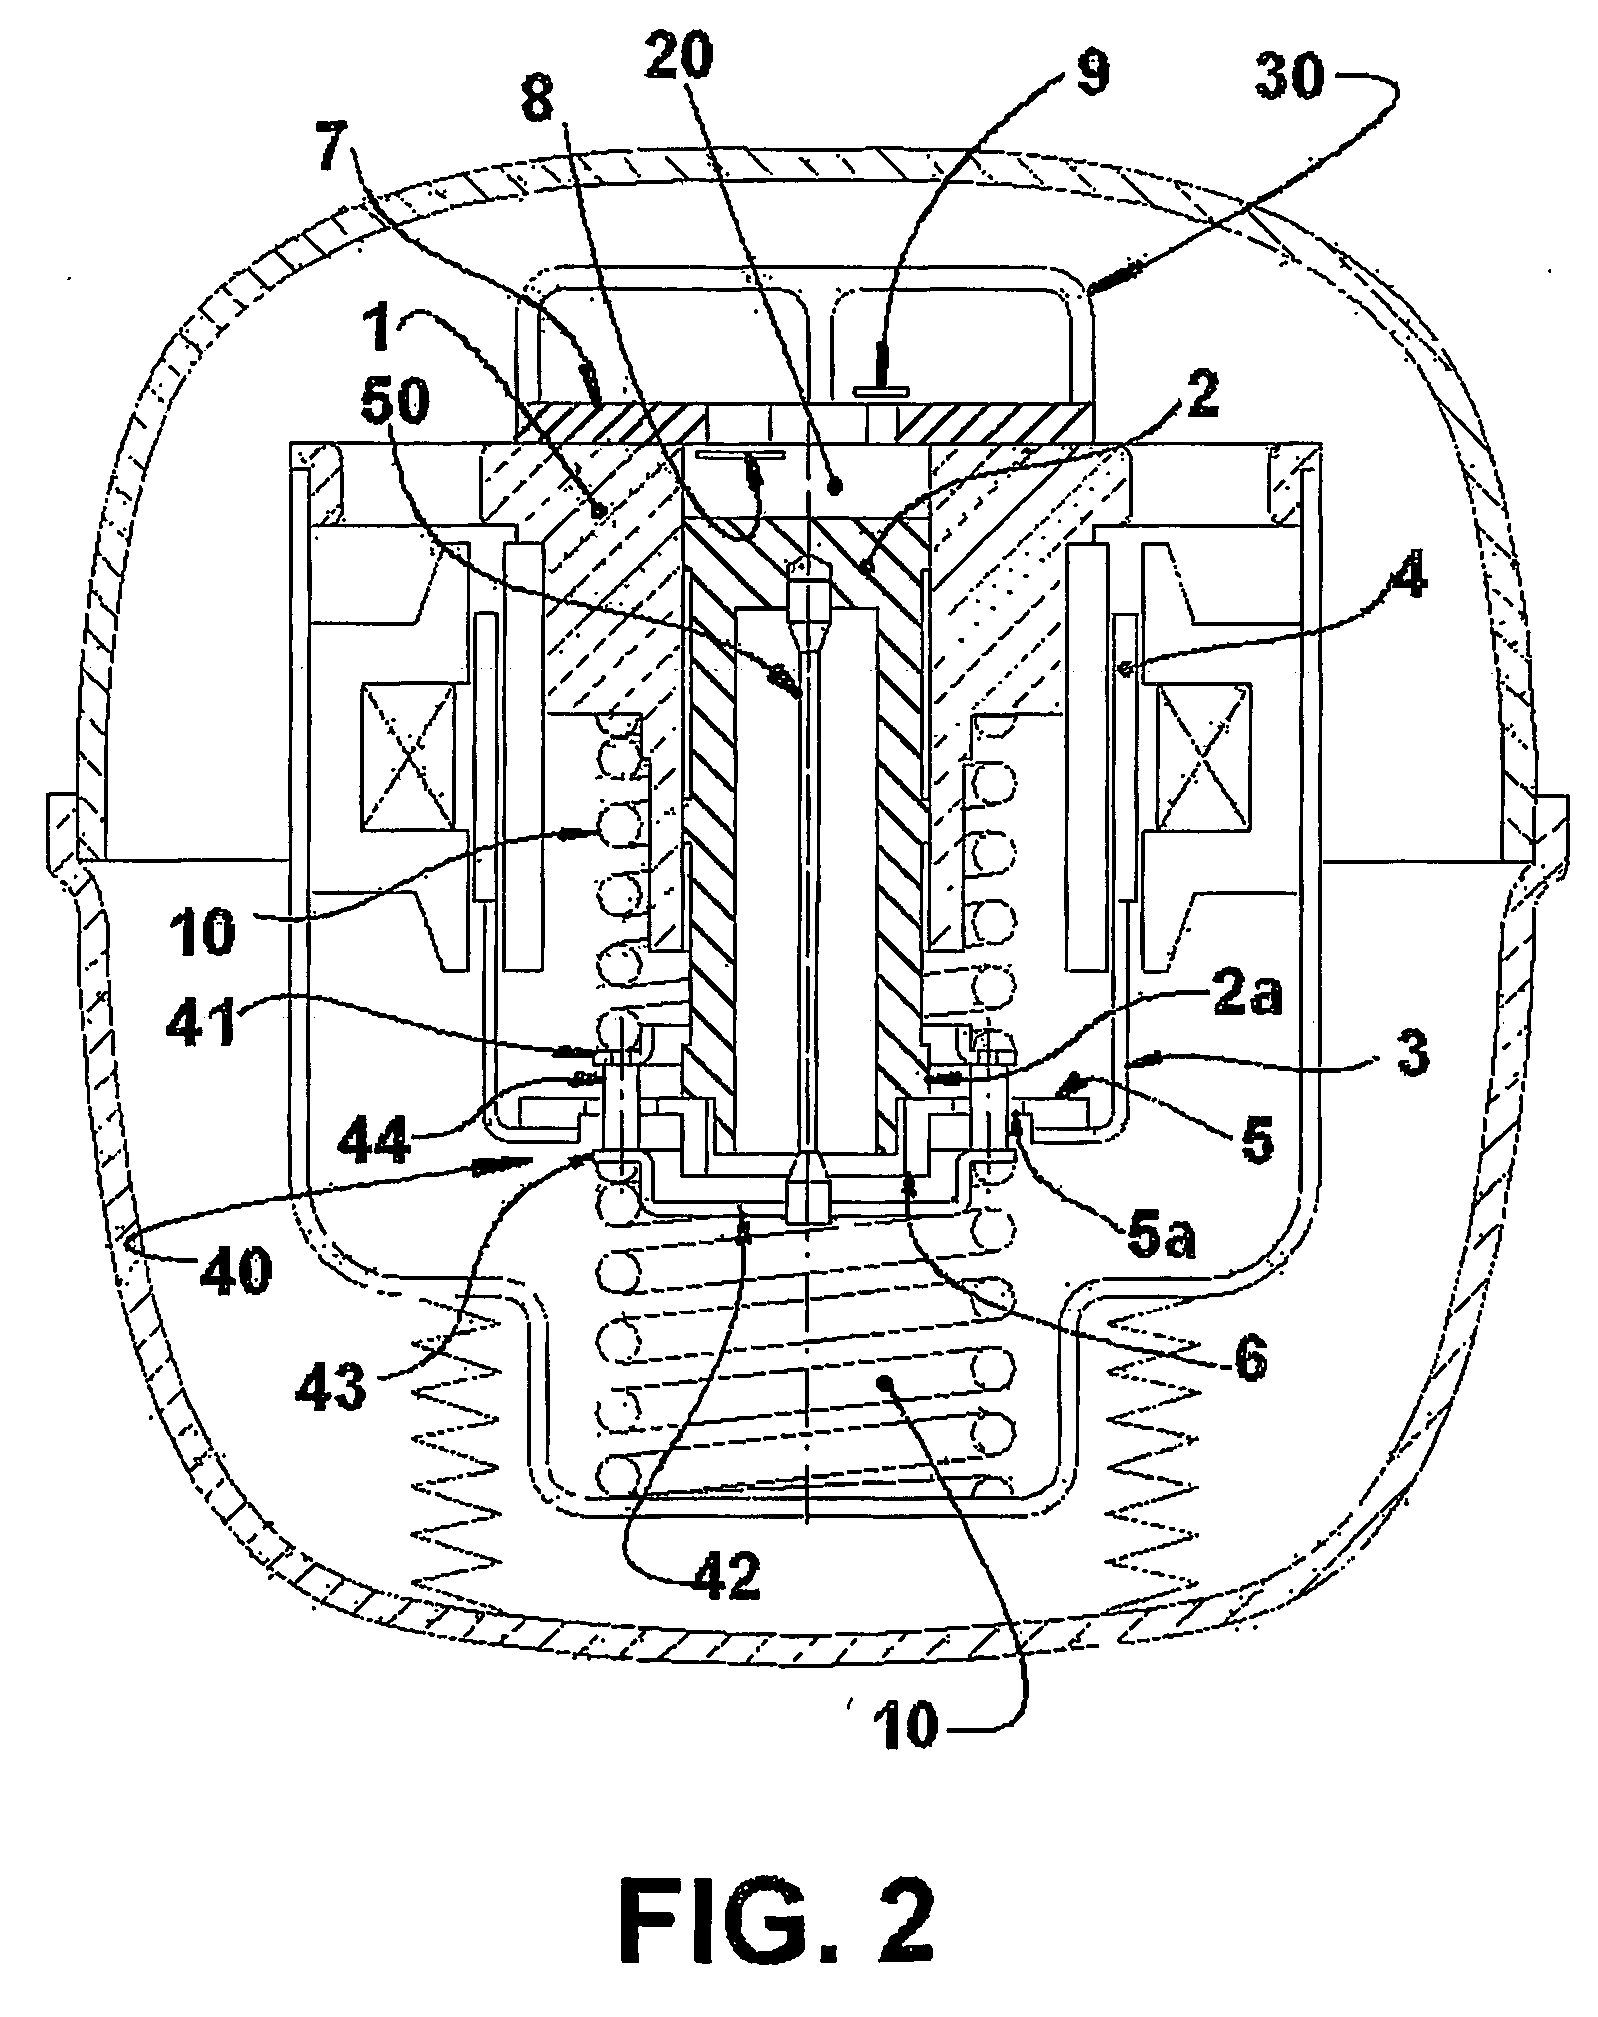 Reciprocating compressor driven by a linear motor